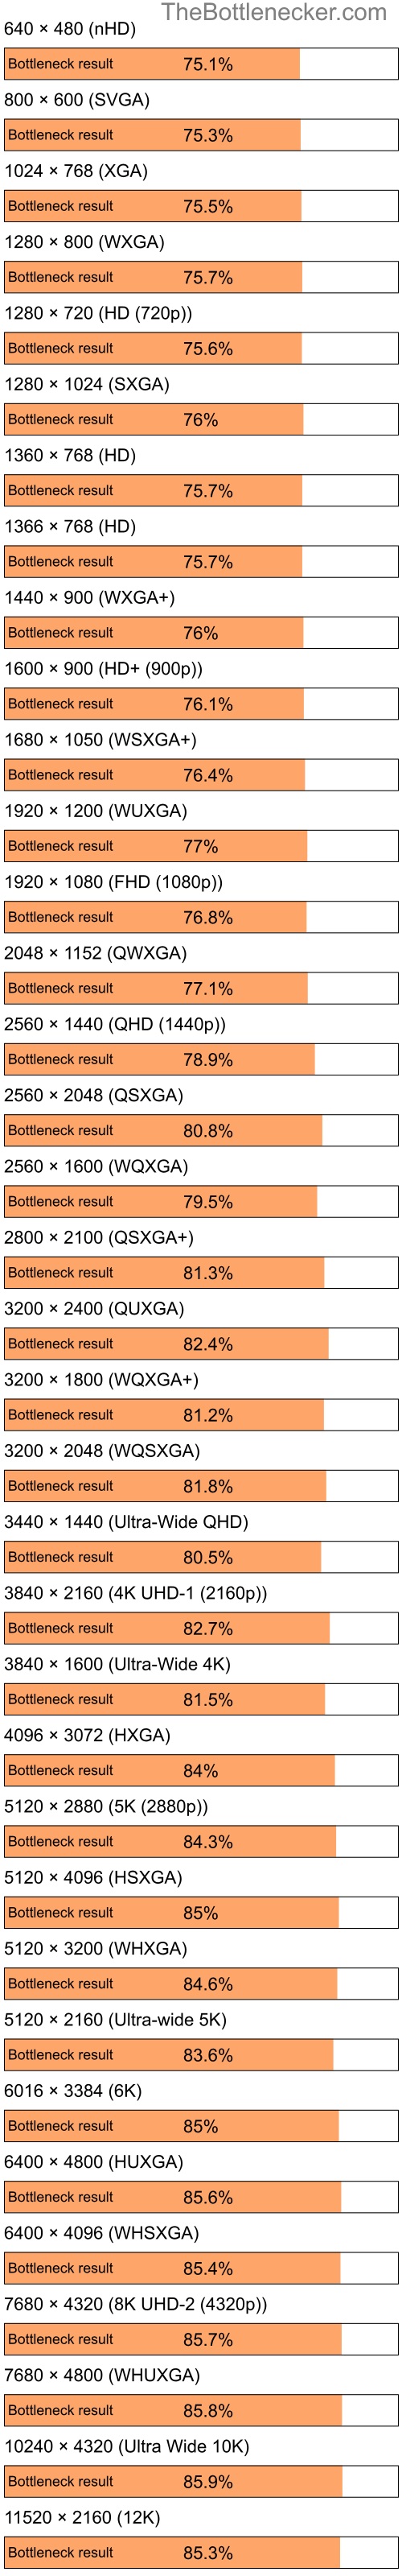 Bottleneck results by resolution for Intel Celeron and AMD Mobility Radeon 9600 in General Tasks